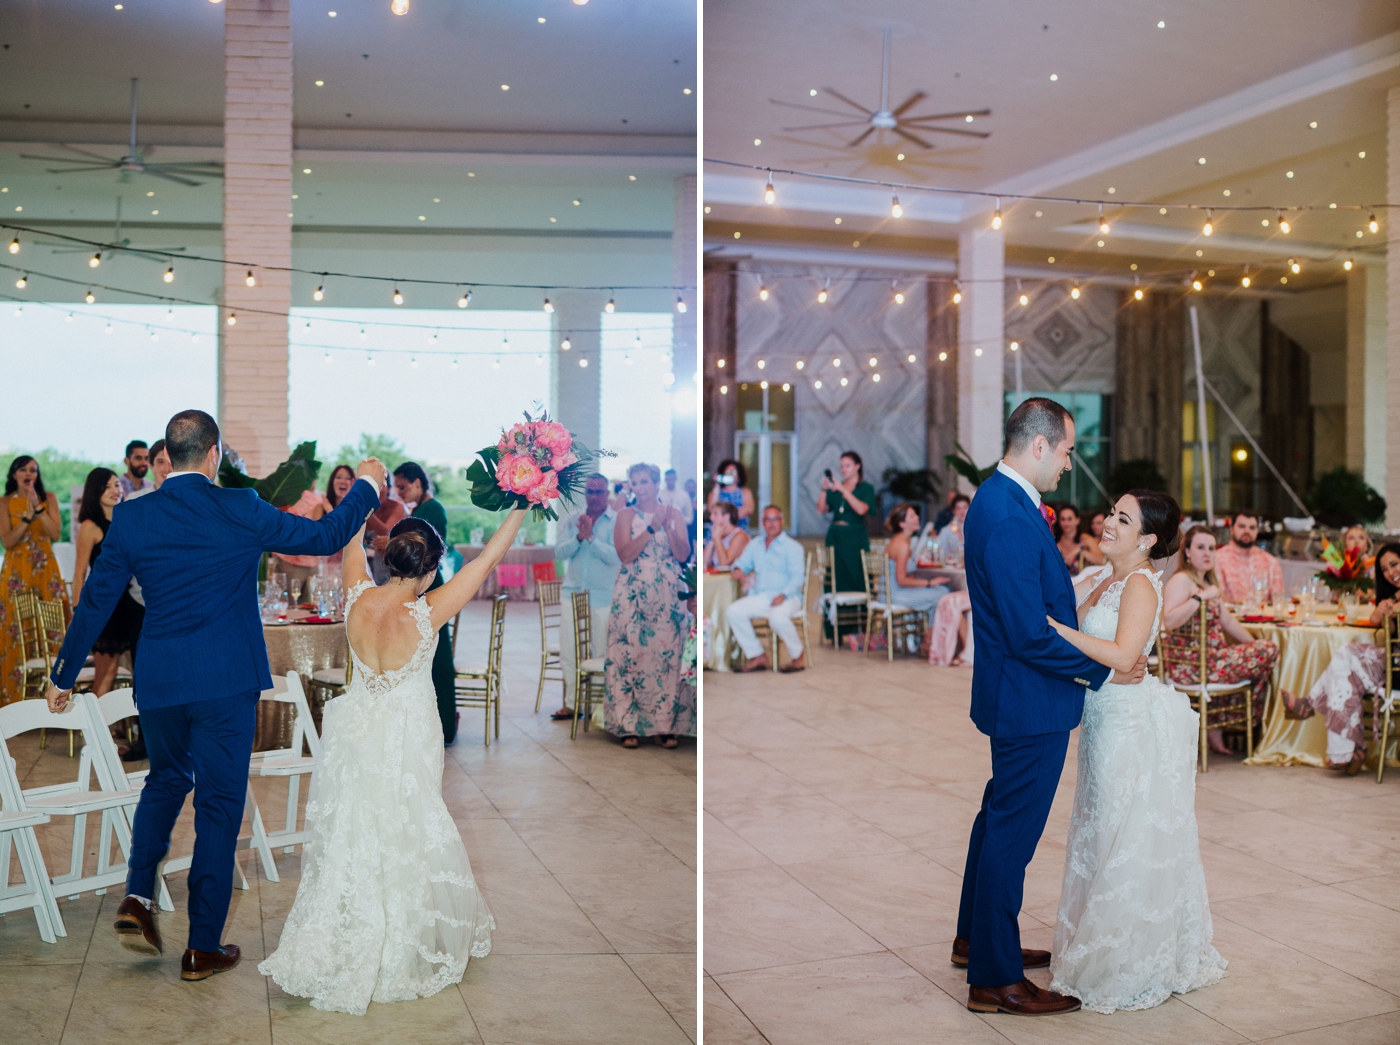 Wedding Reception at Moon Palace Resort in Cancun | Izzy + Co.